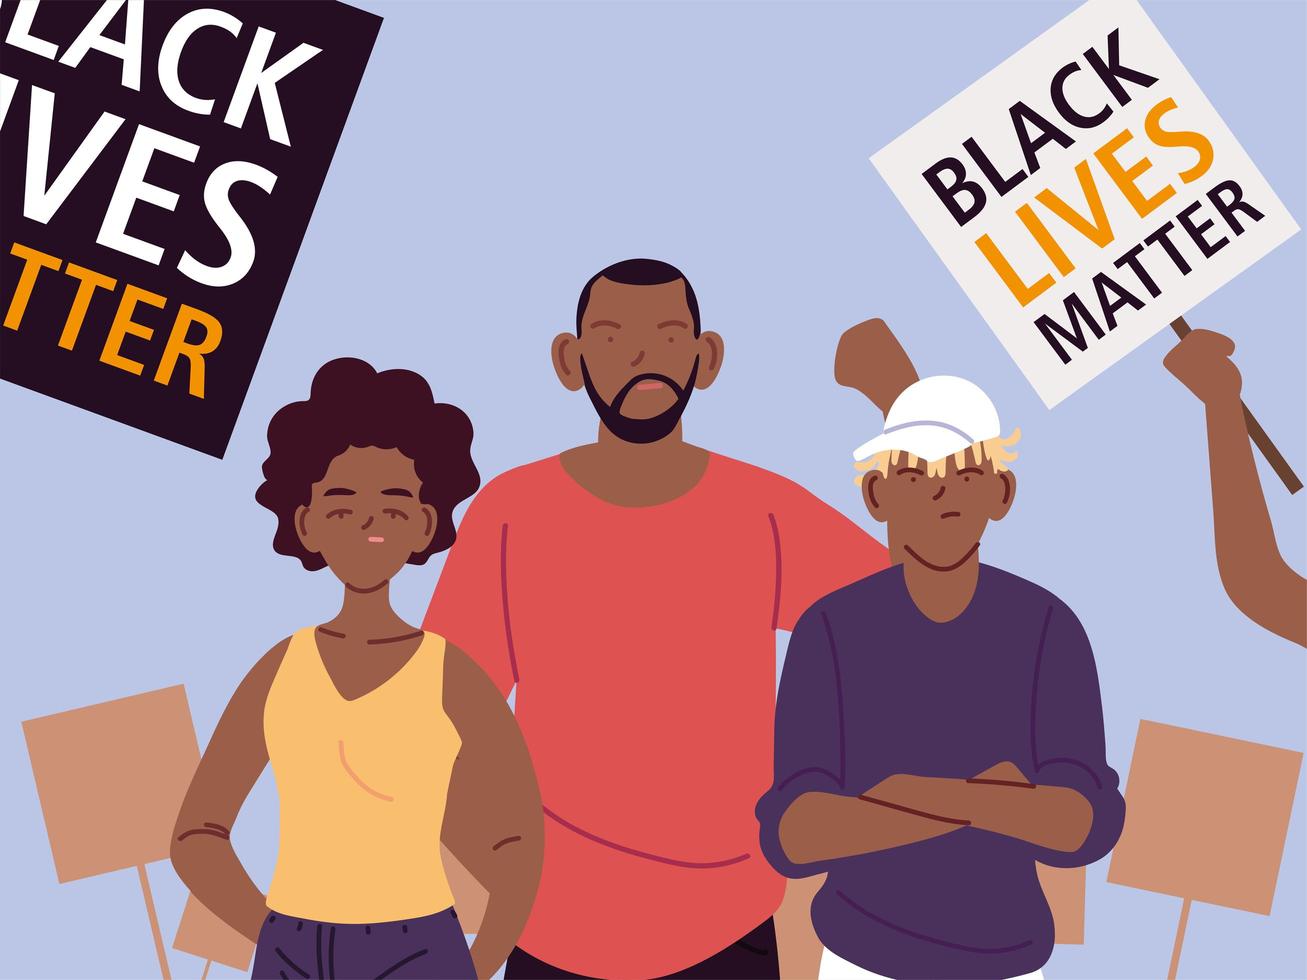 Black lives matter with mother father son cartoons and banners vector design